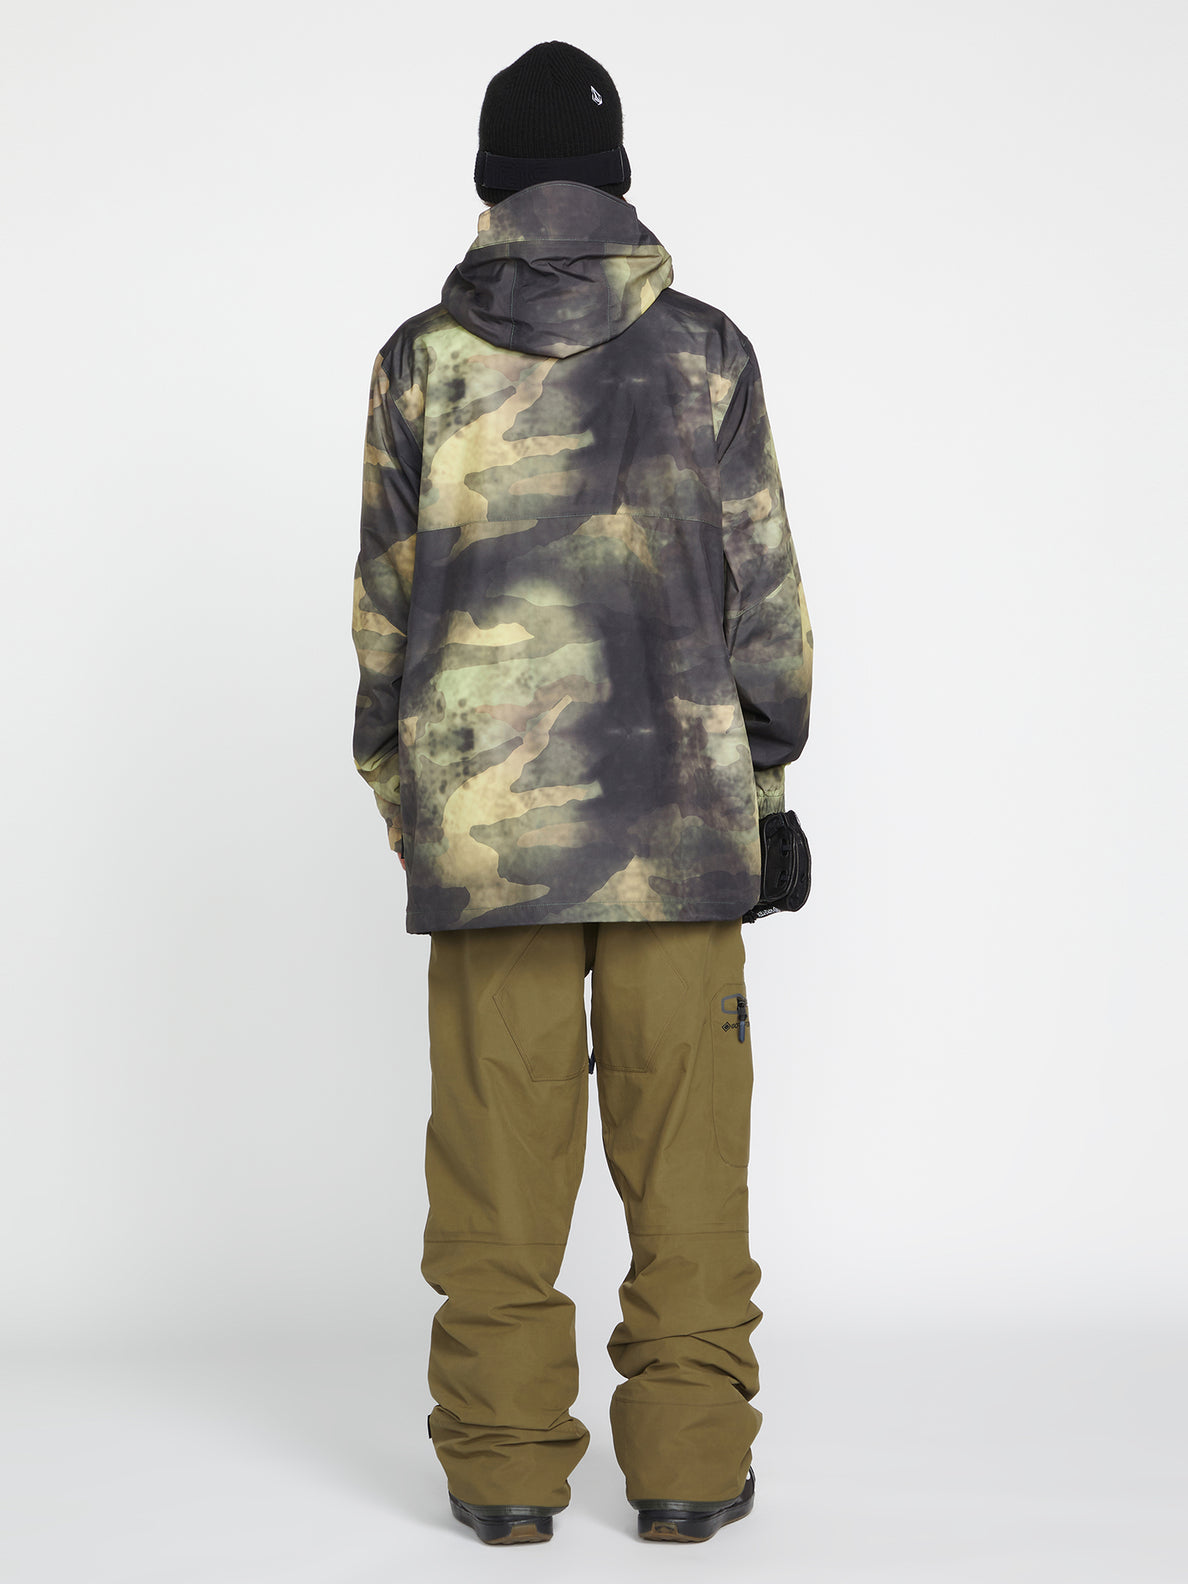 Mens L Gore-Tex Jacket - Camouflage